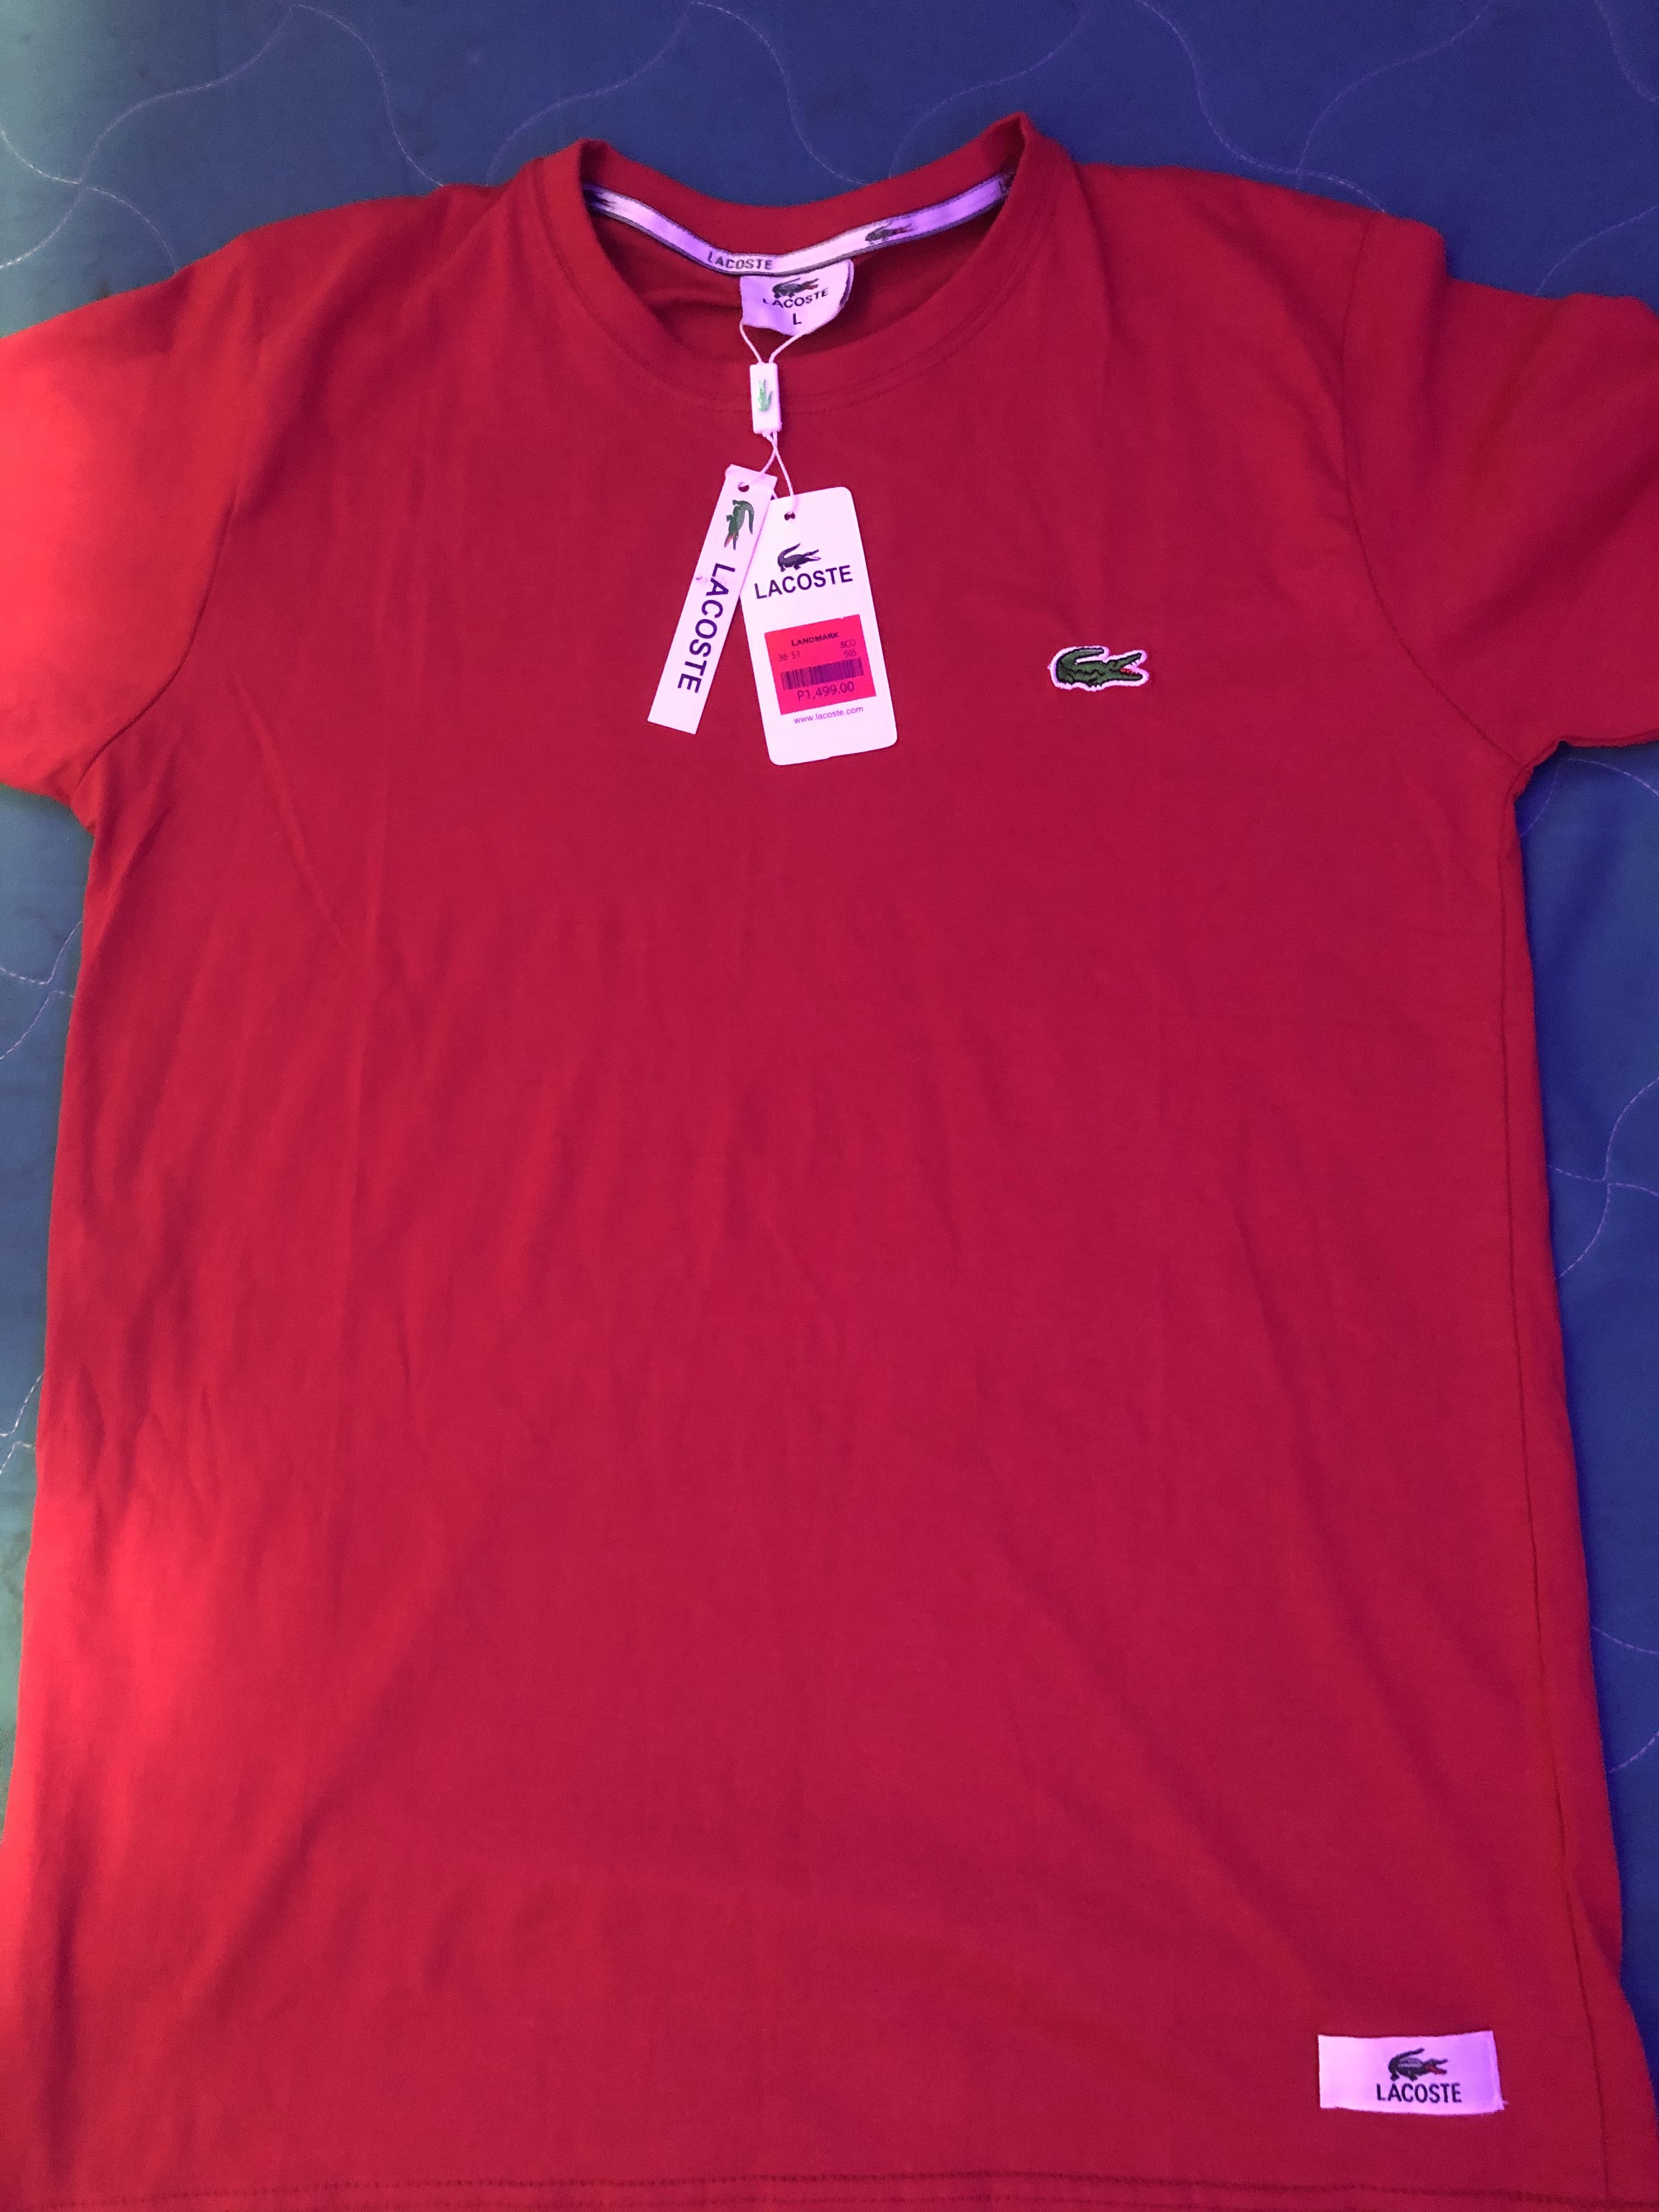 lacoste shirt red